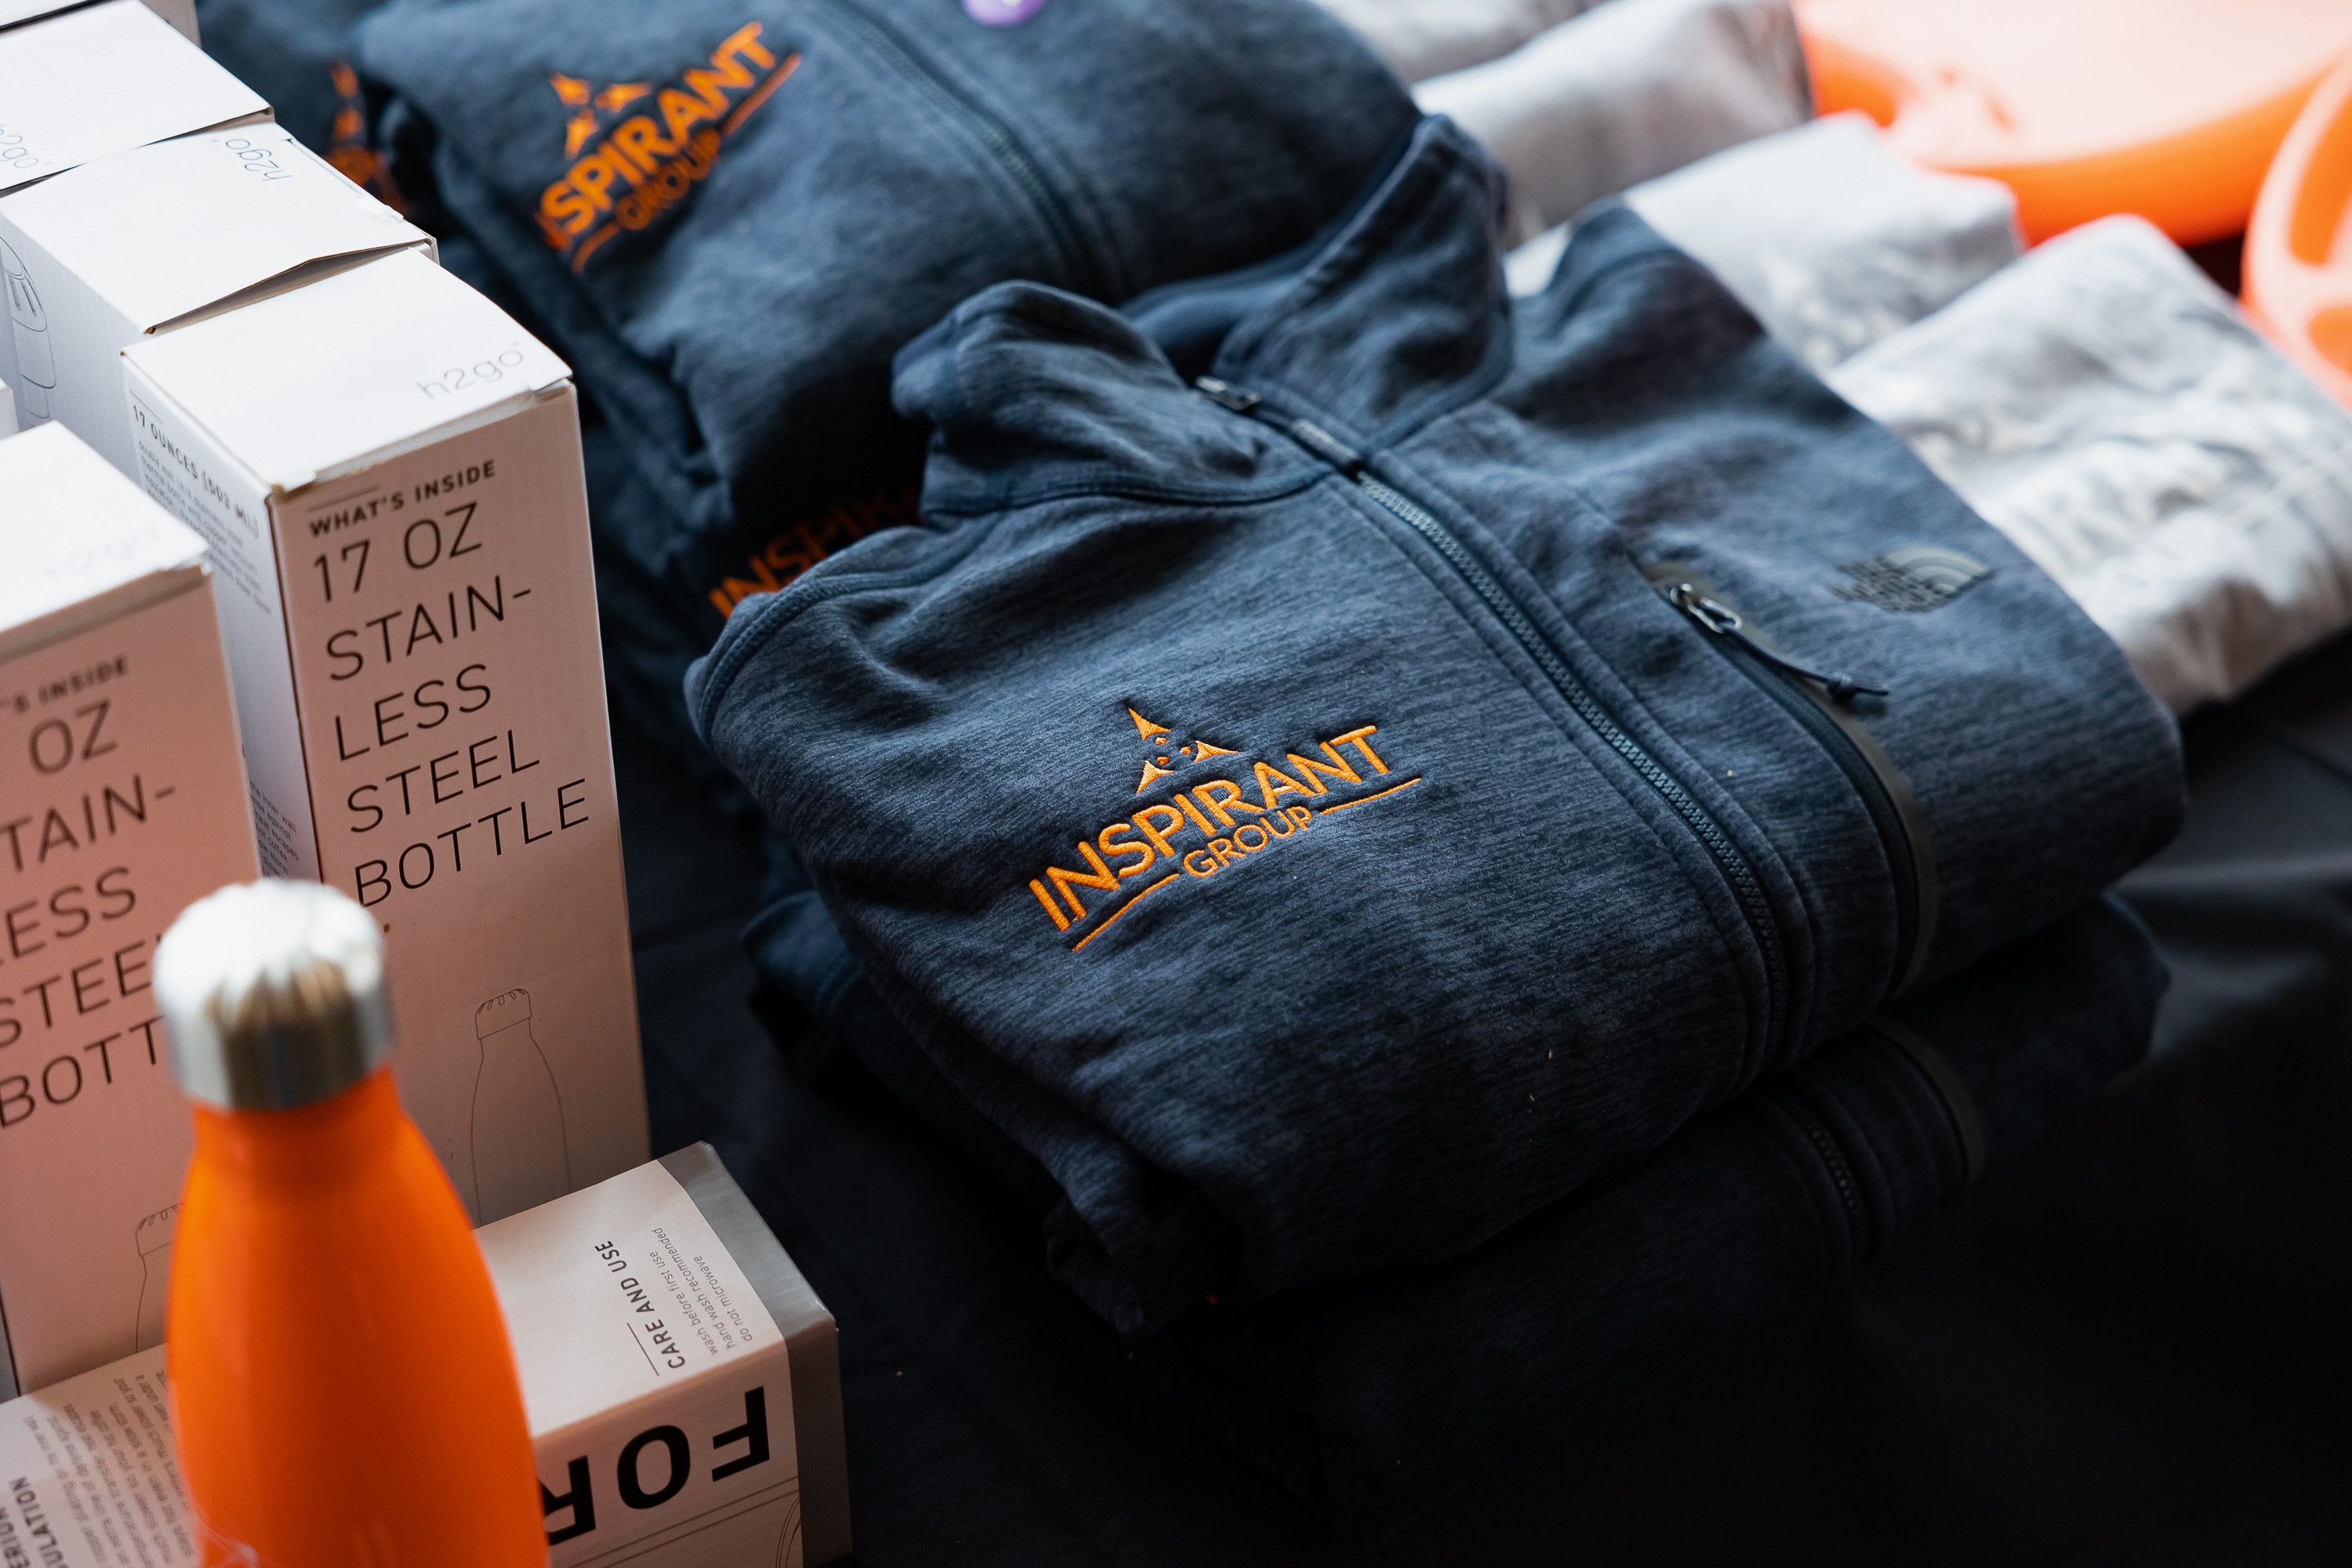 Inspirant's retreat swag with water bottles, apparel and more